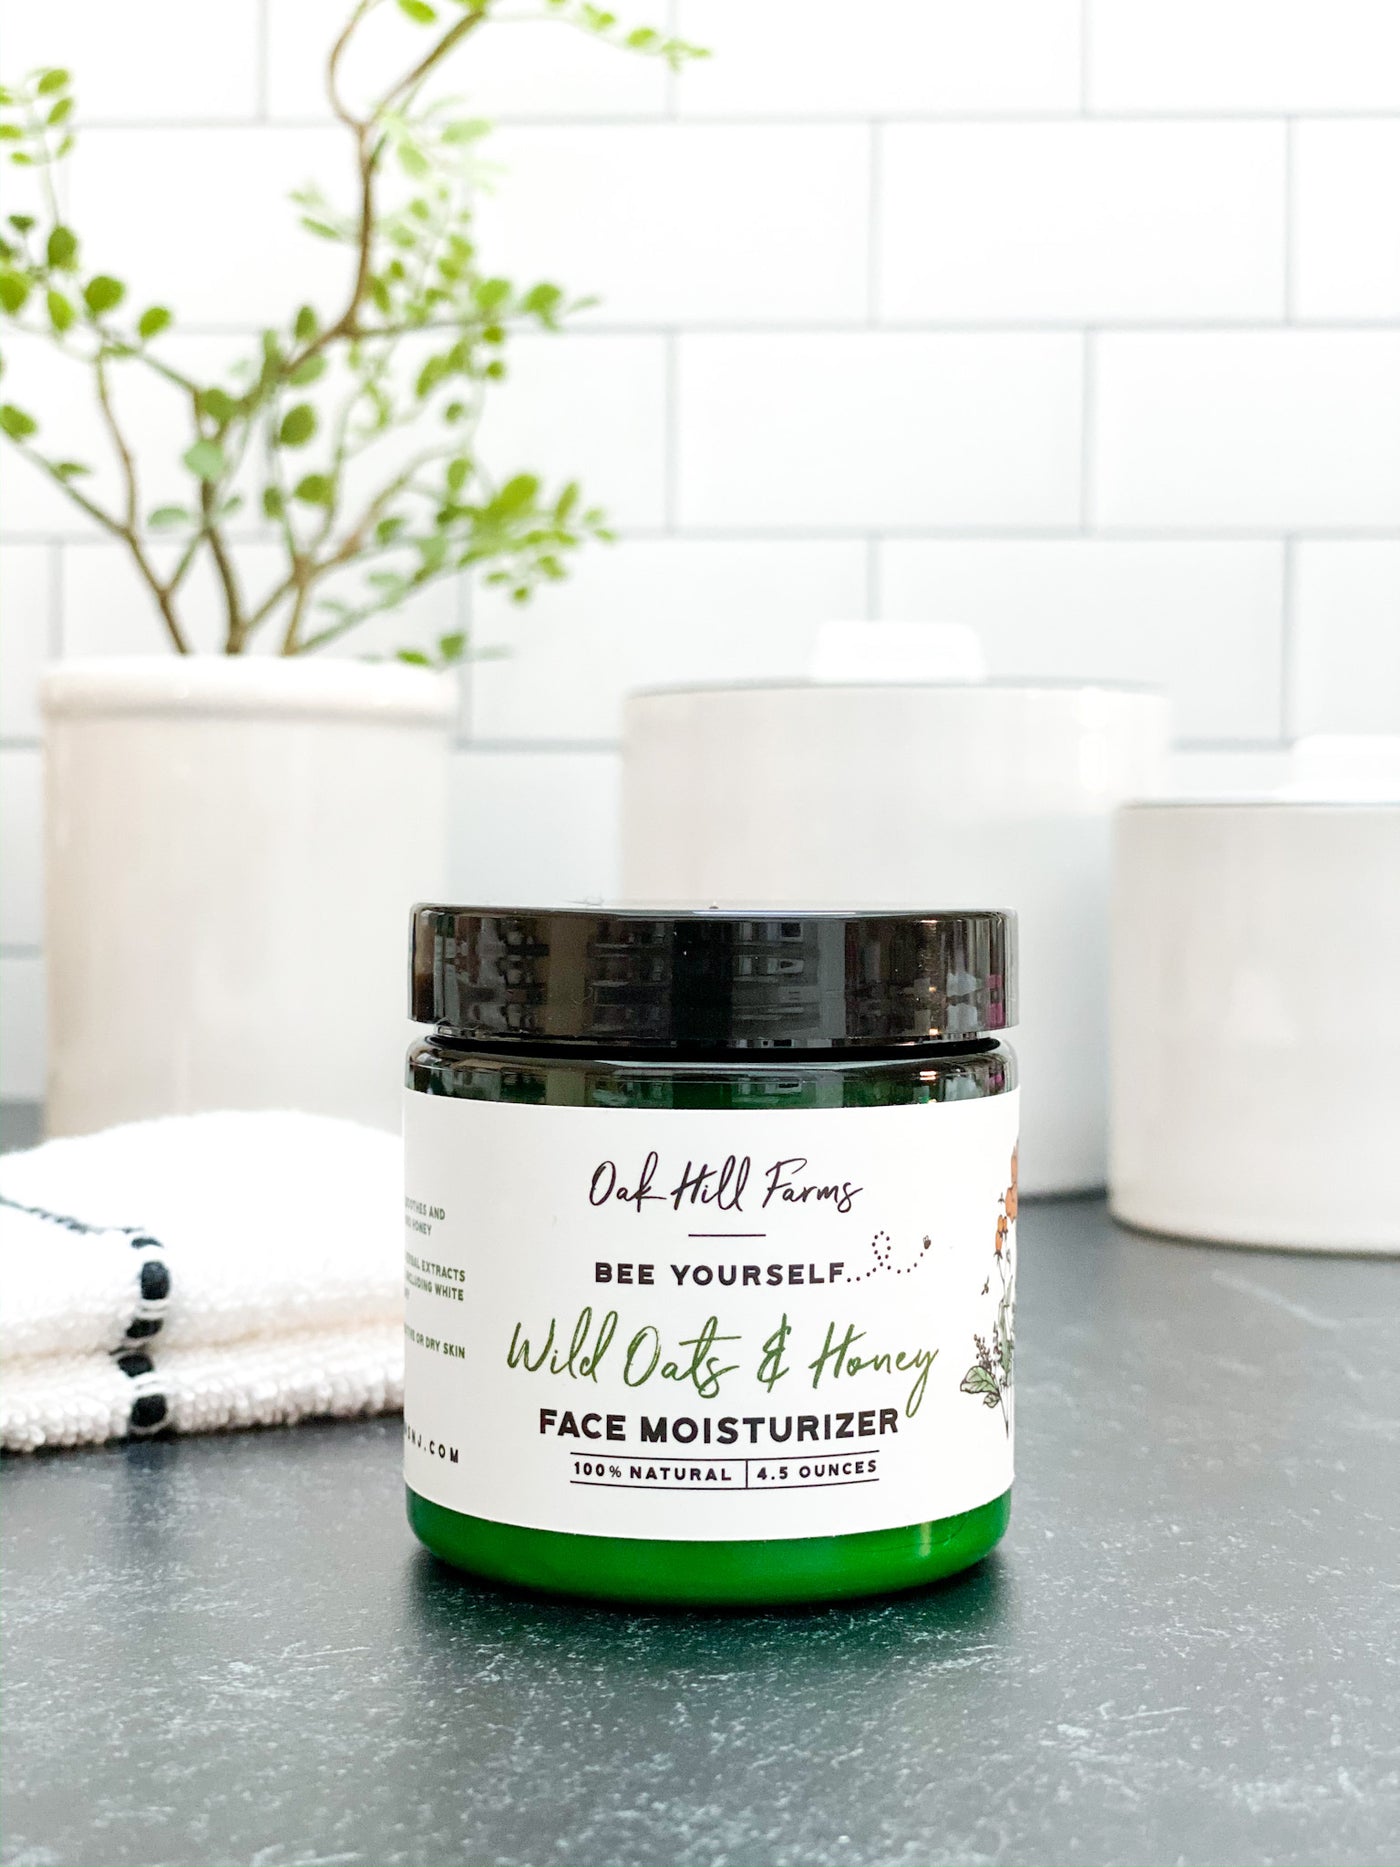 FACE MOISTURIZER - Wild Oats & Honey (won't be restocked until February. Check our other moisturizer)